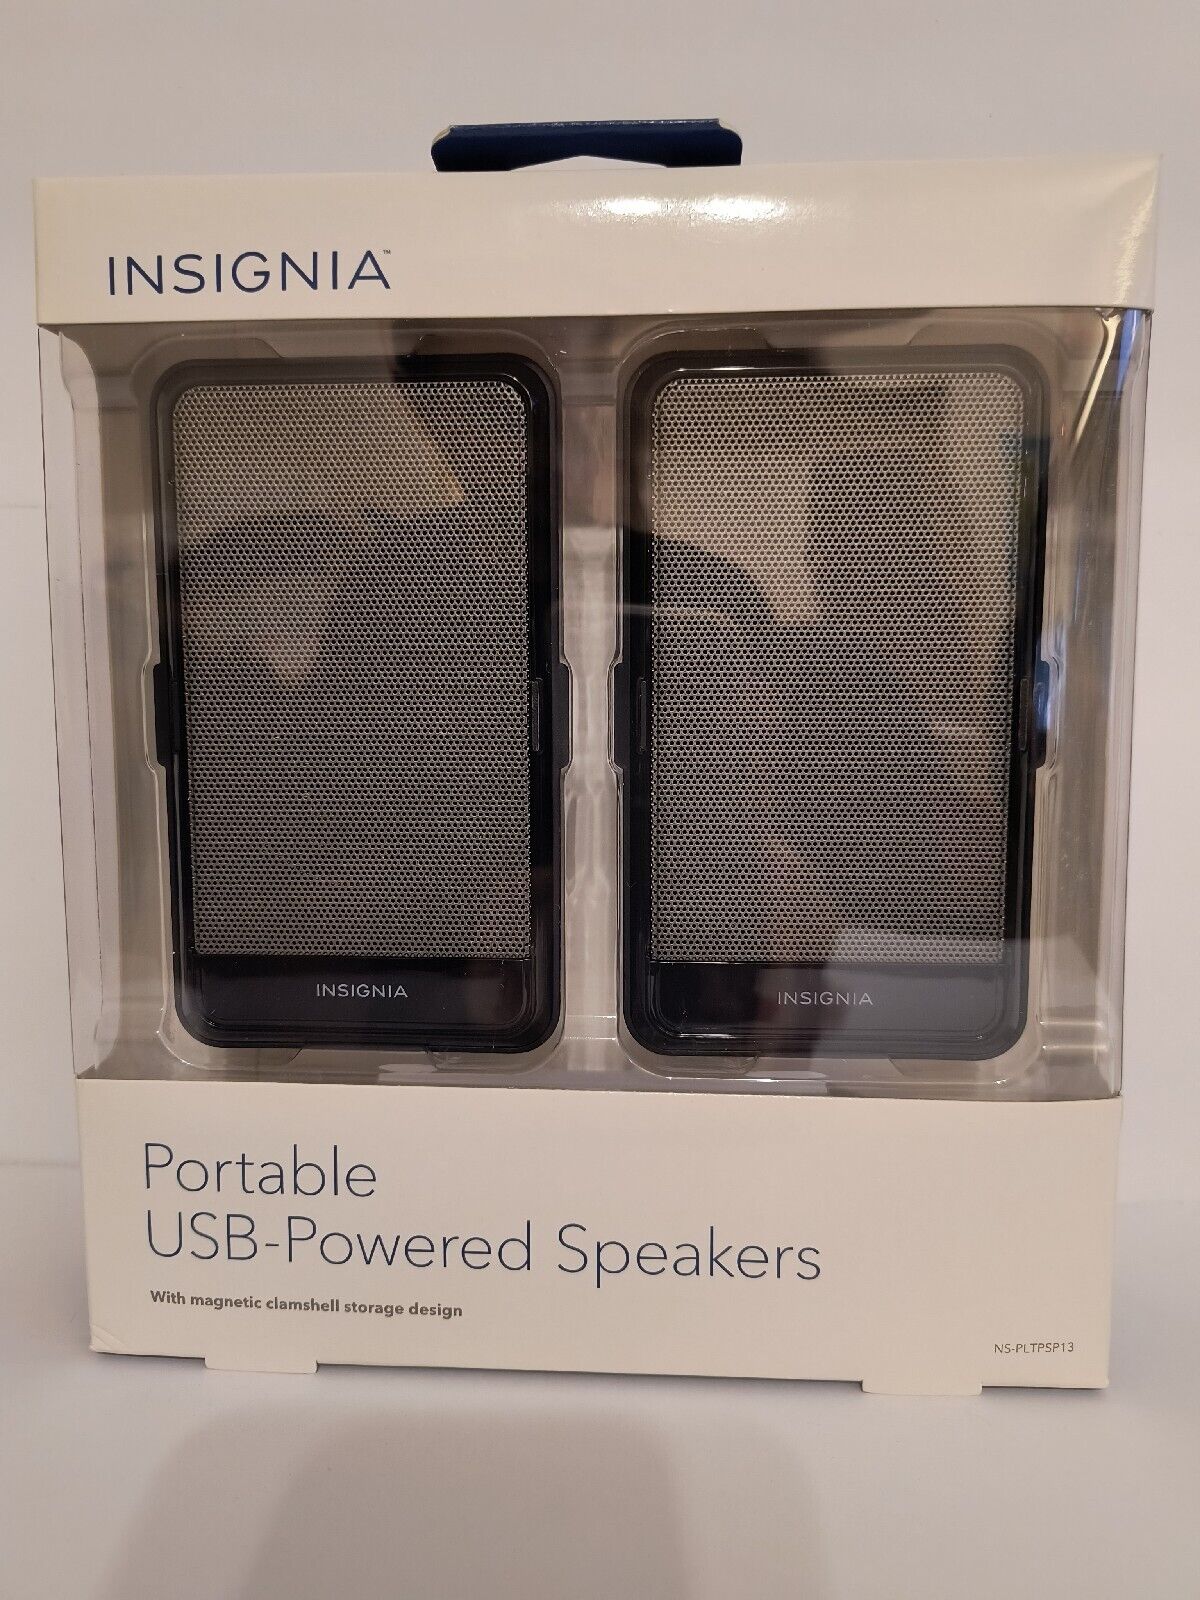 USB Powered Insignia Portable  Speakers NS-PLTPSP13 New Sealed